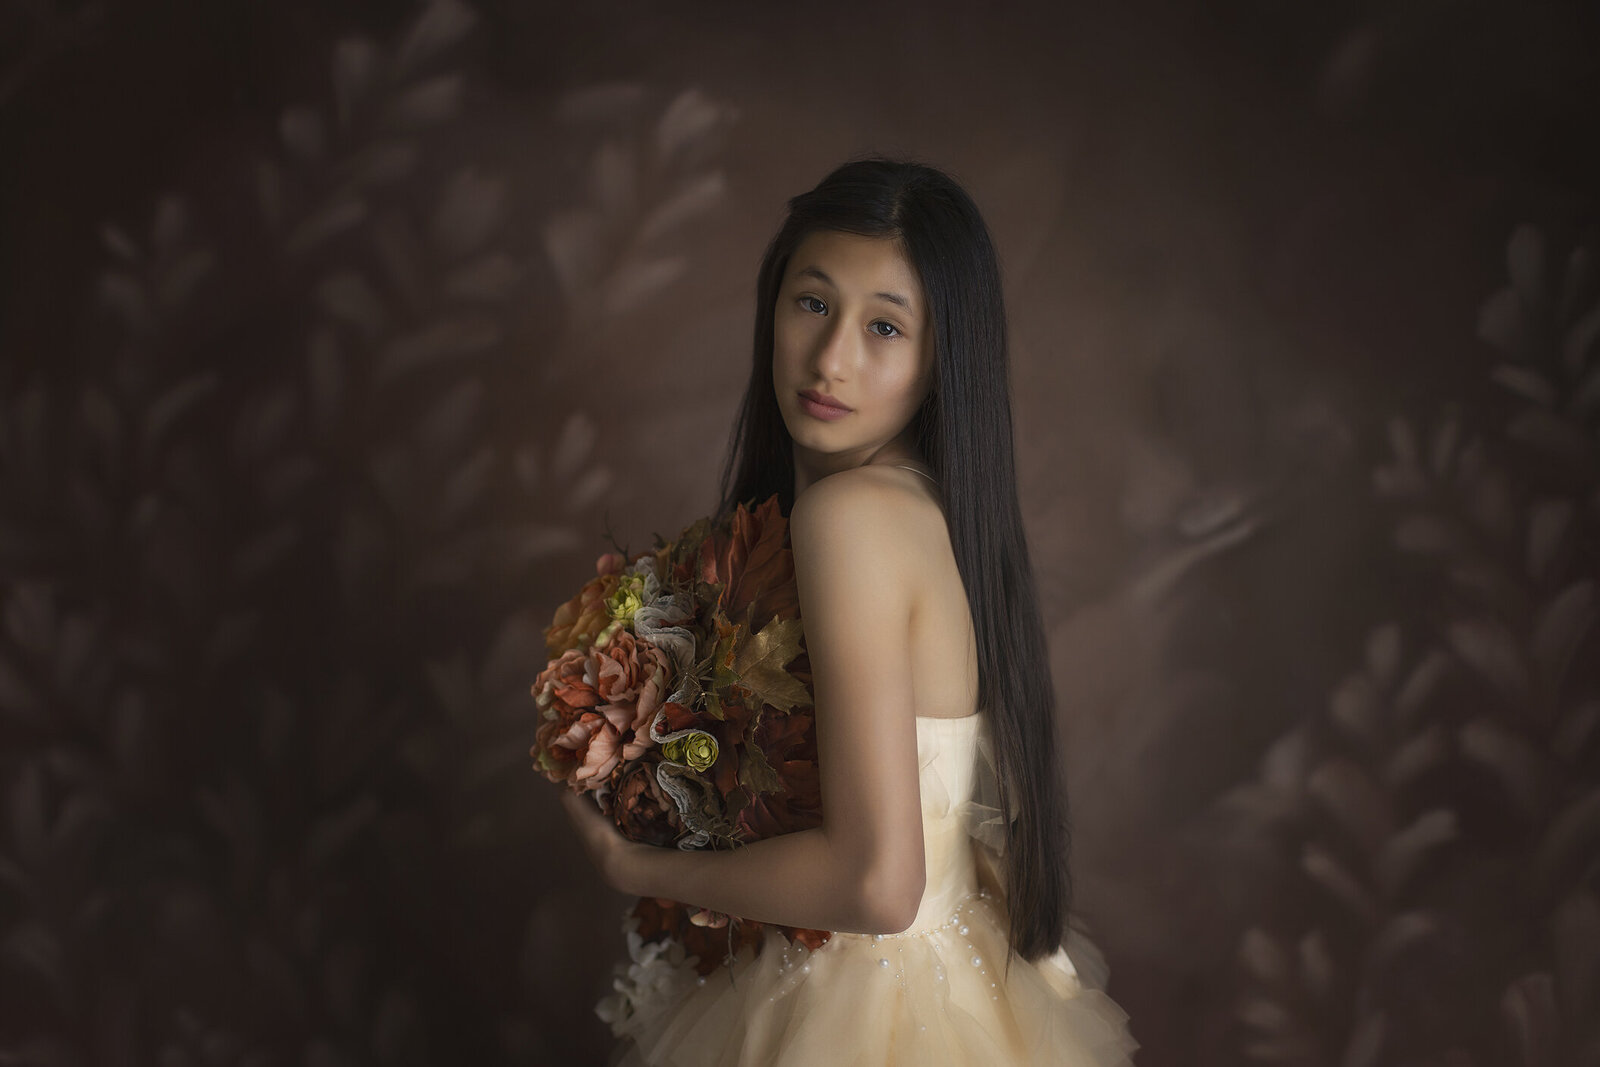 Fine art photography with Dallas area tween.